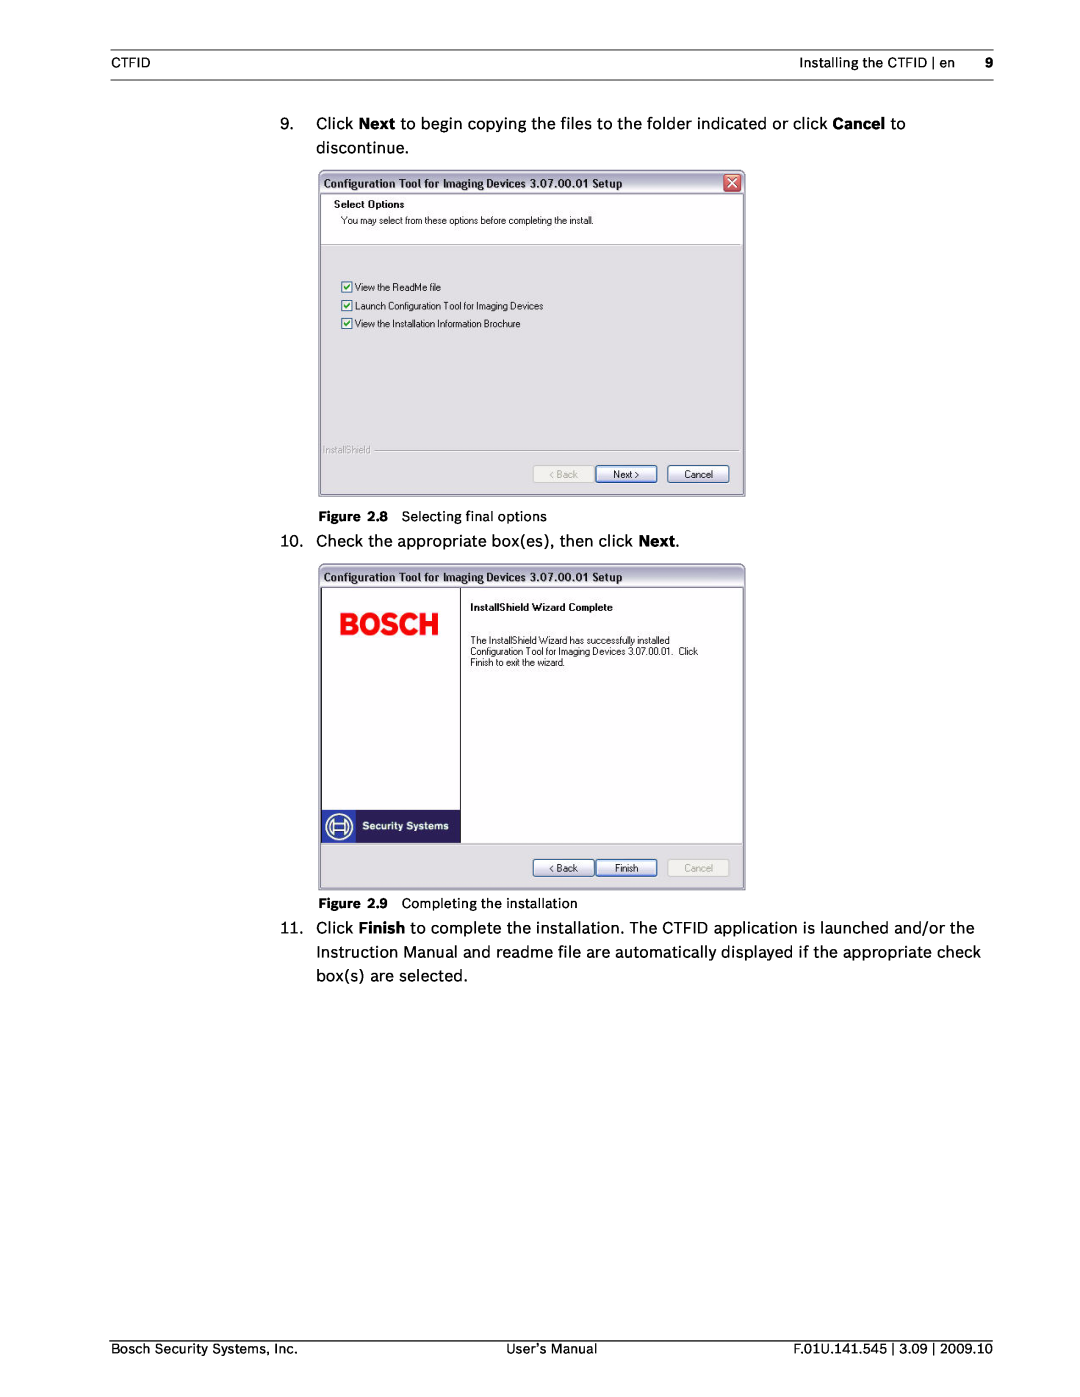 Bosch Appliances VP-CFGSFT user manual Check the appropriate boxes, then click Next 